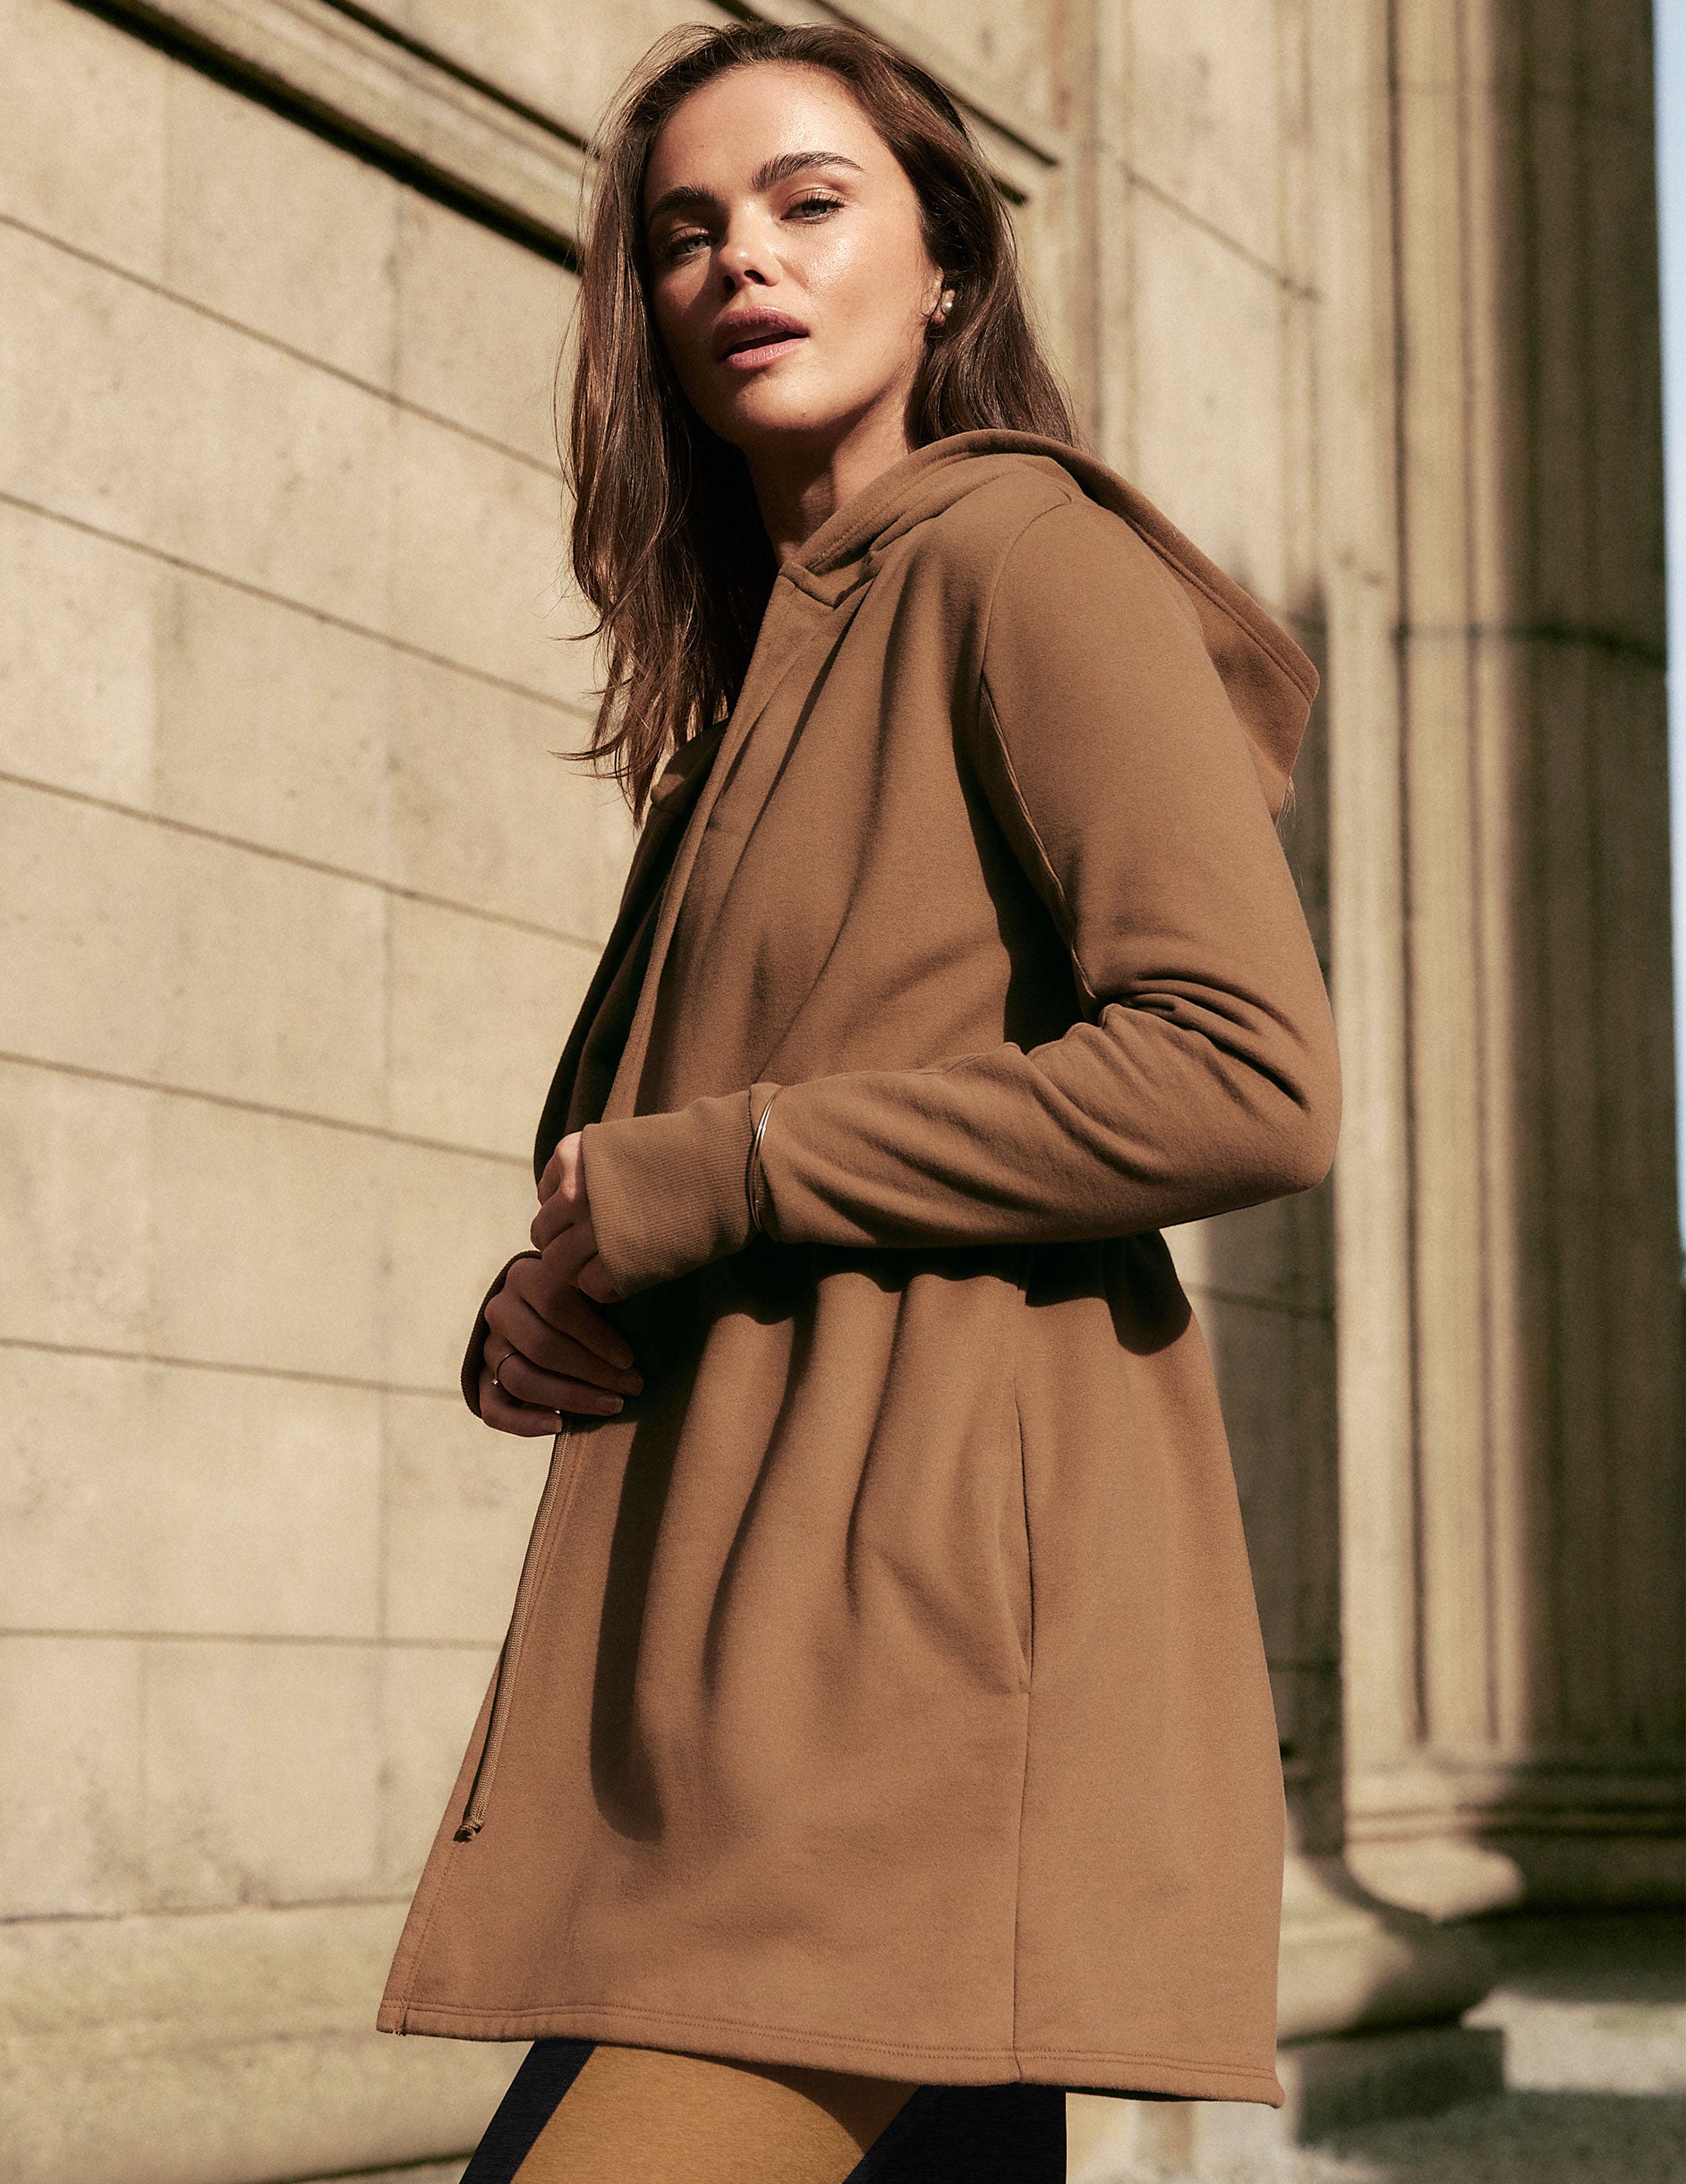 brown hooded jacket with a drawstring at the waist and thumb holes. 